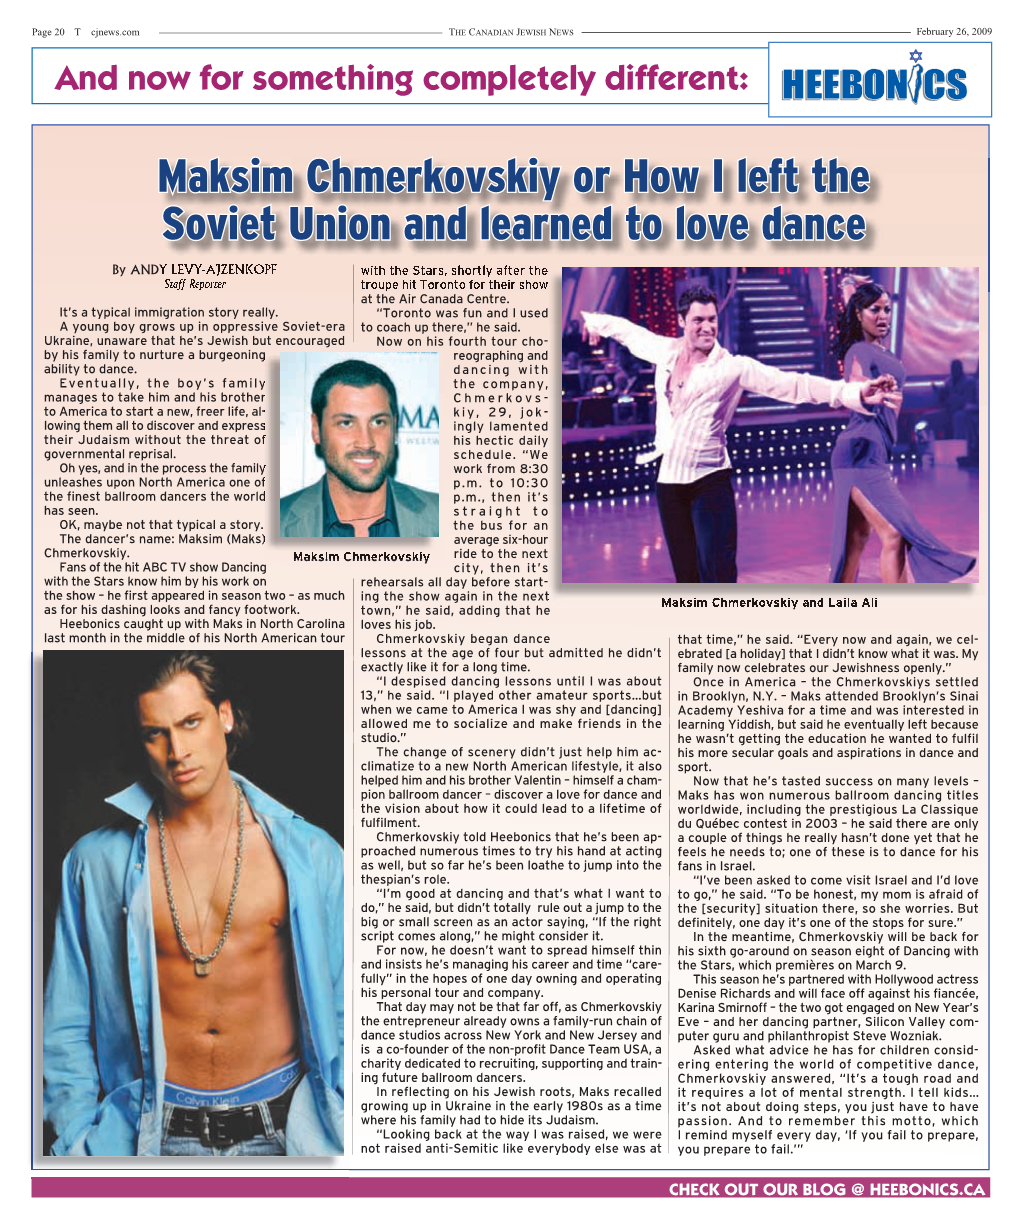 Maksim Chmerkovskiy Or How I Left the Soviet Union and Learned to Love Dance